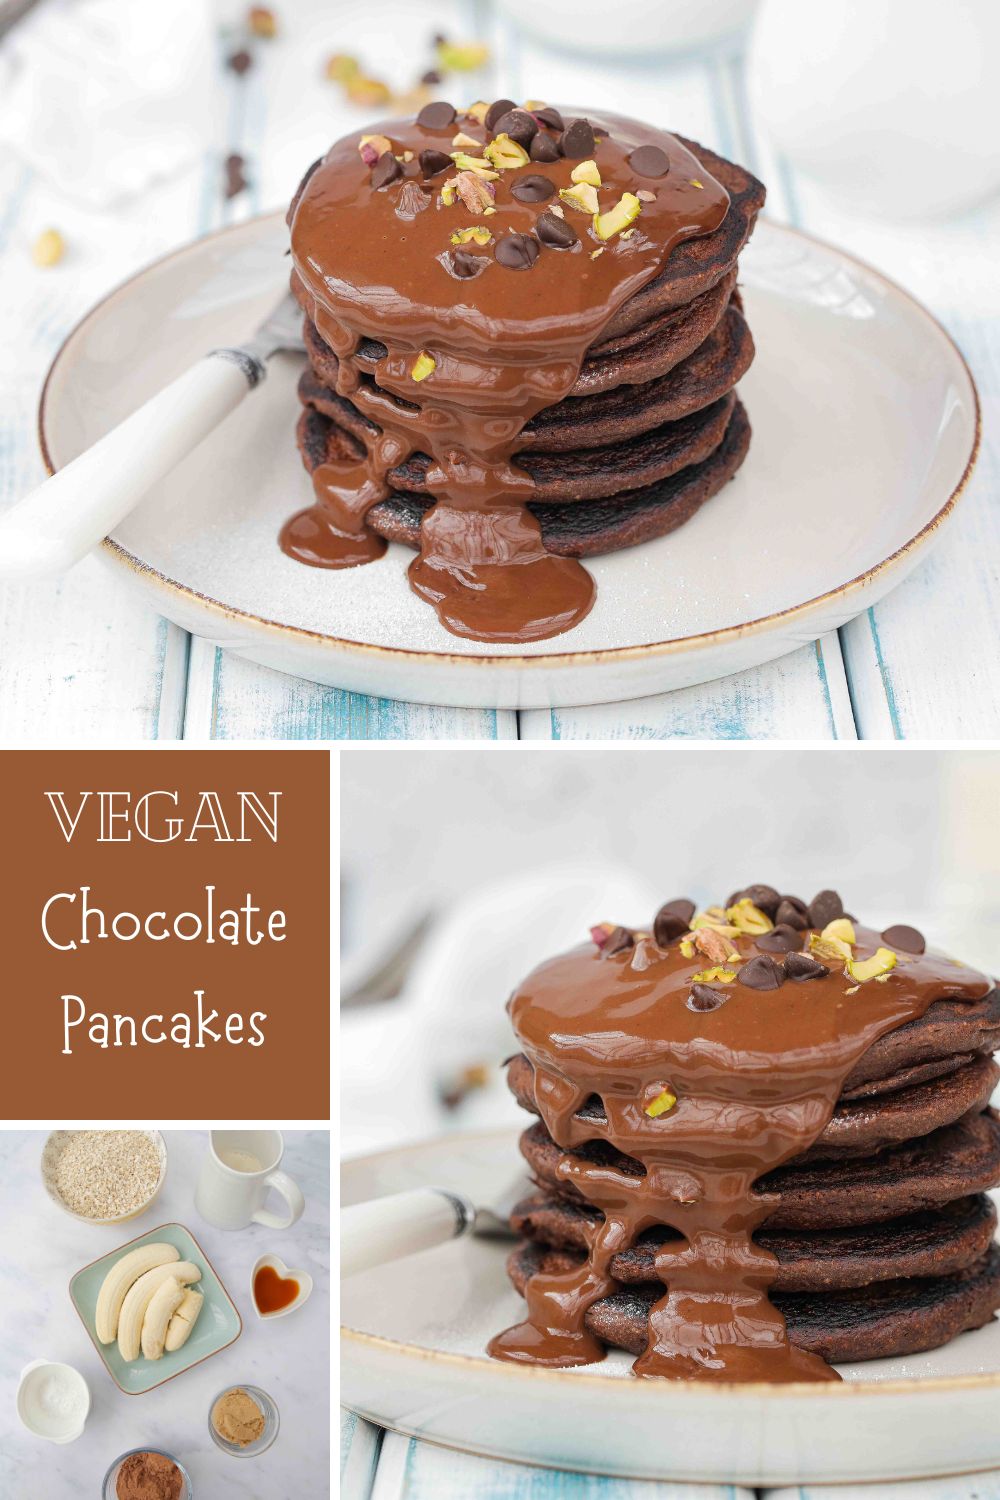 These easy vegan and gluten free chocolate pancakes are a chocolate lovers dream! Fluffy, full of rich cacao flavour and made with simple ingredients - including the divine chocolate sauce! Recipe on thecookandhim.com | #veganpancakes #veganbreakfast #chocolatepancakes #veganrecipes #glutenfree